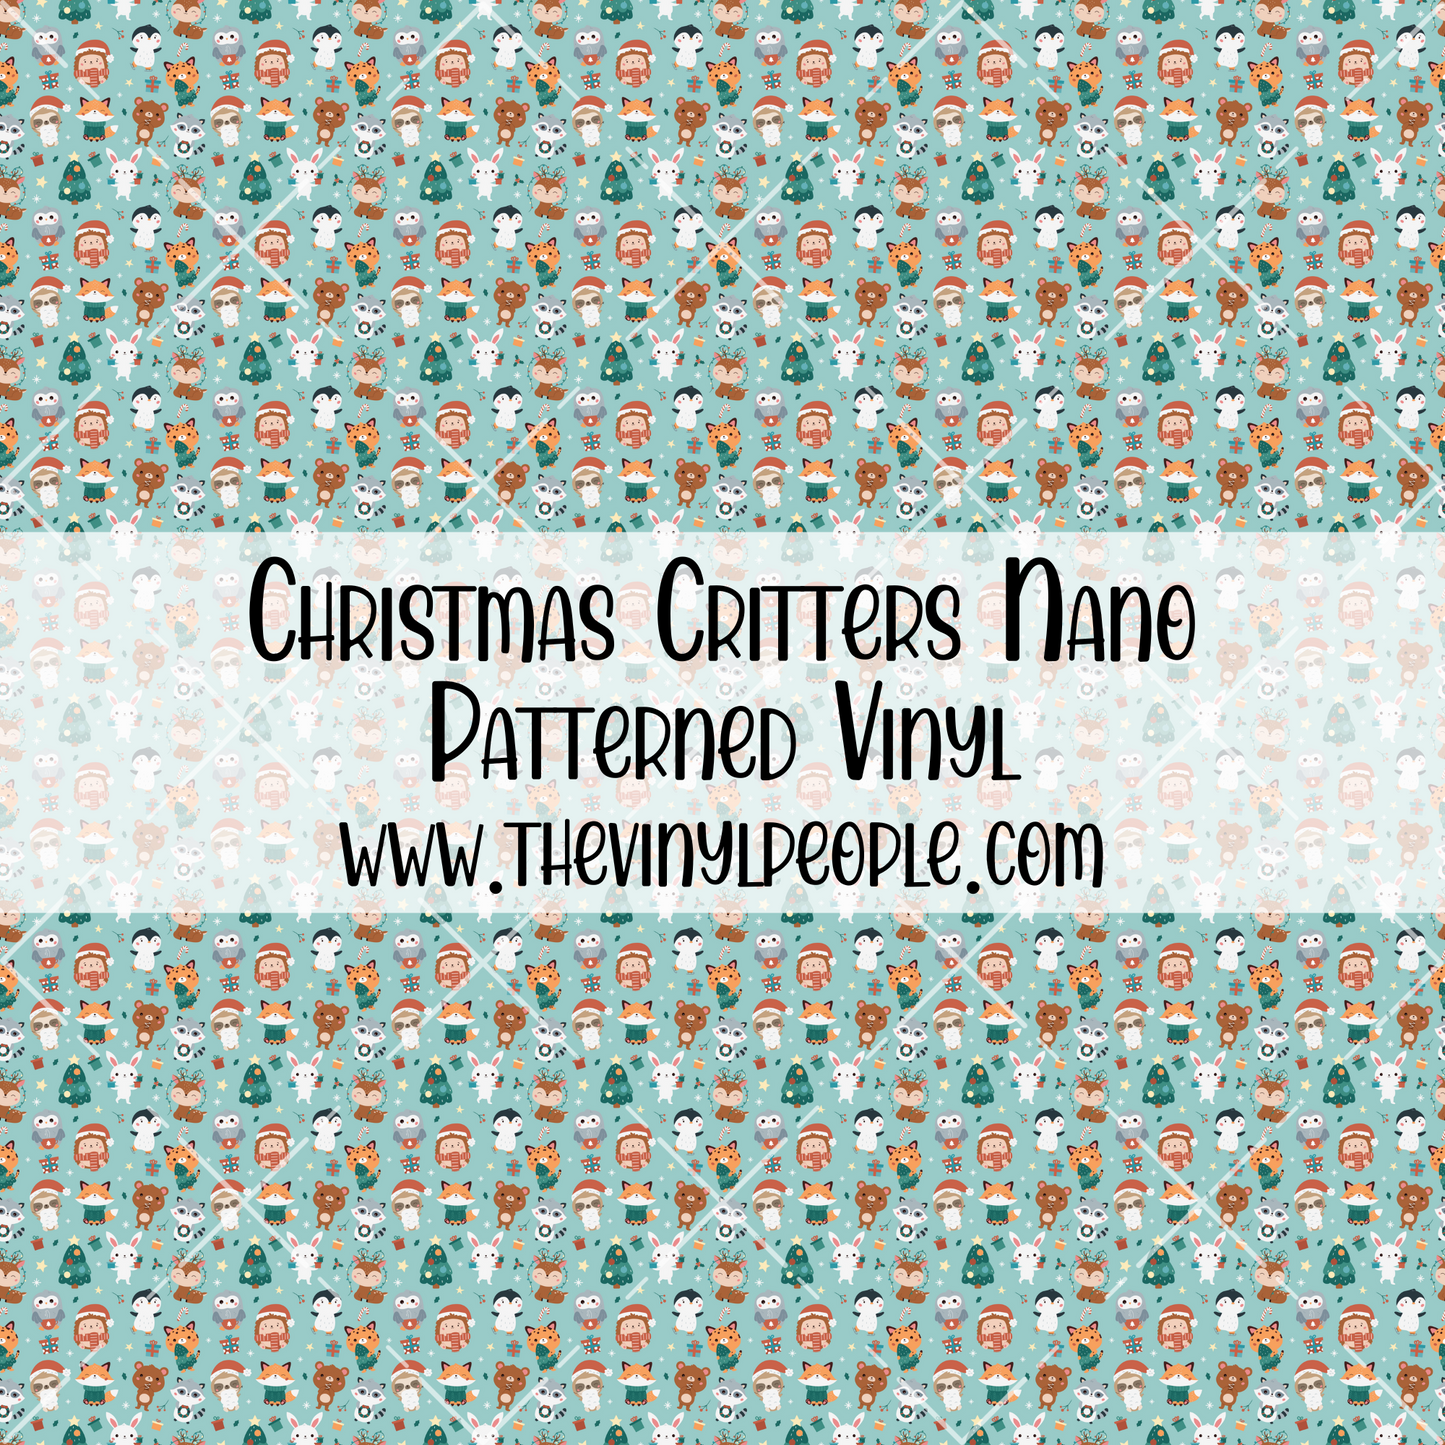 Christmas Critters Patterned Vinyl